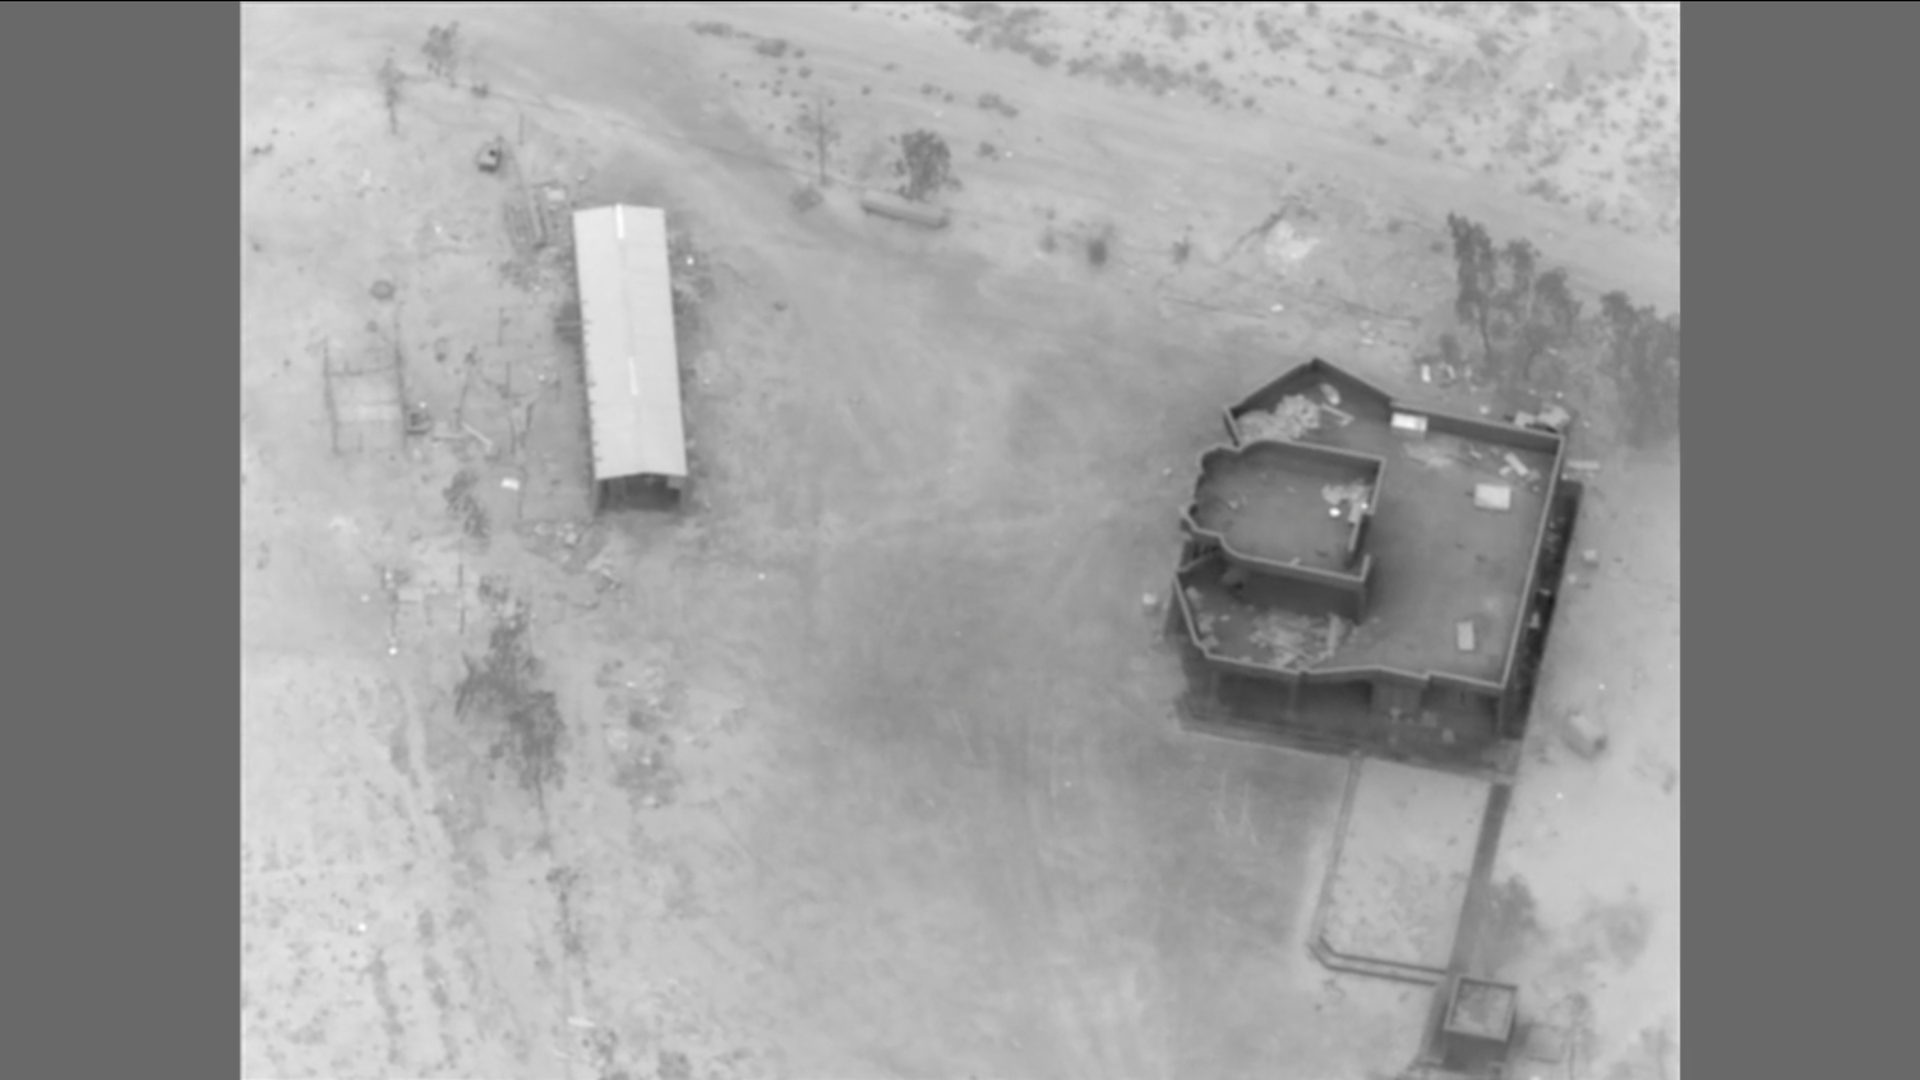 Drone facility used by Iran-backed militias